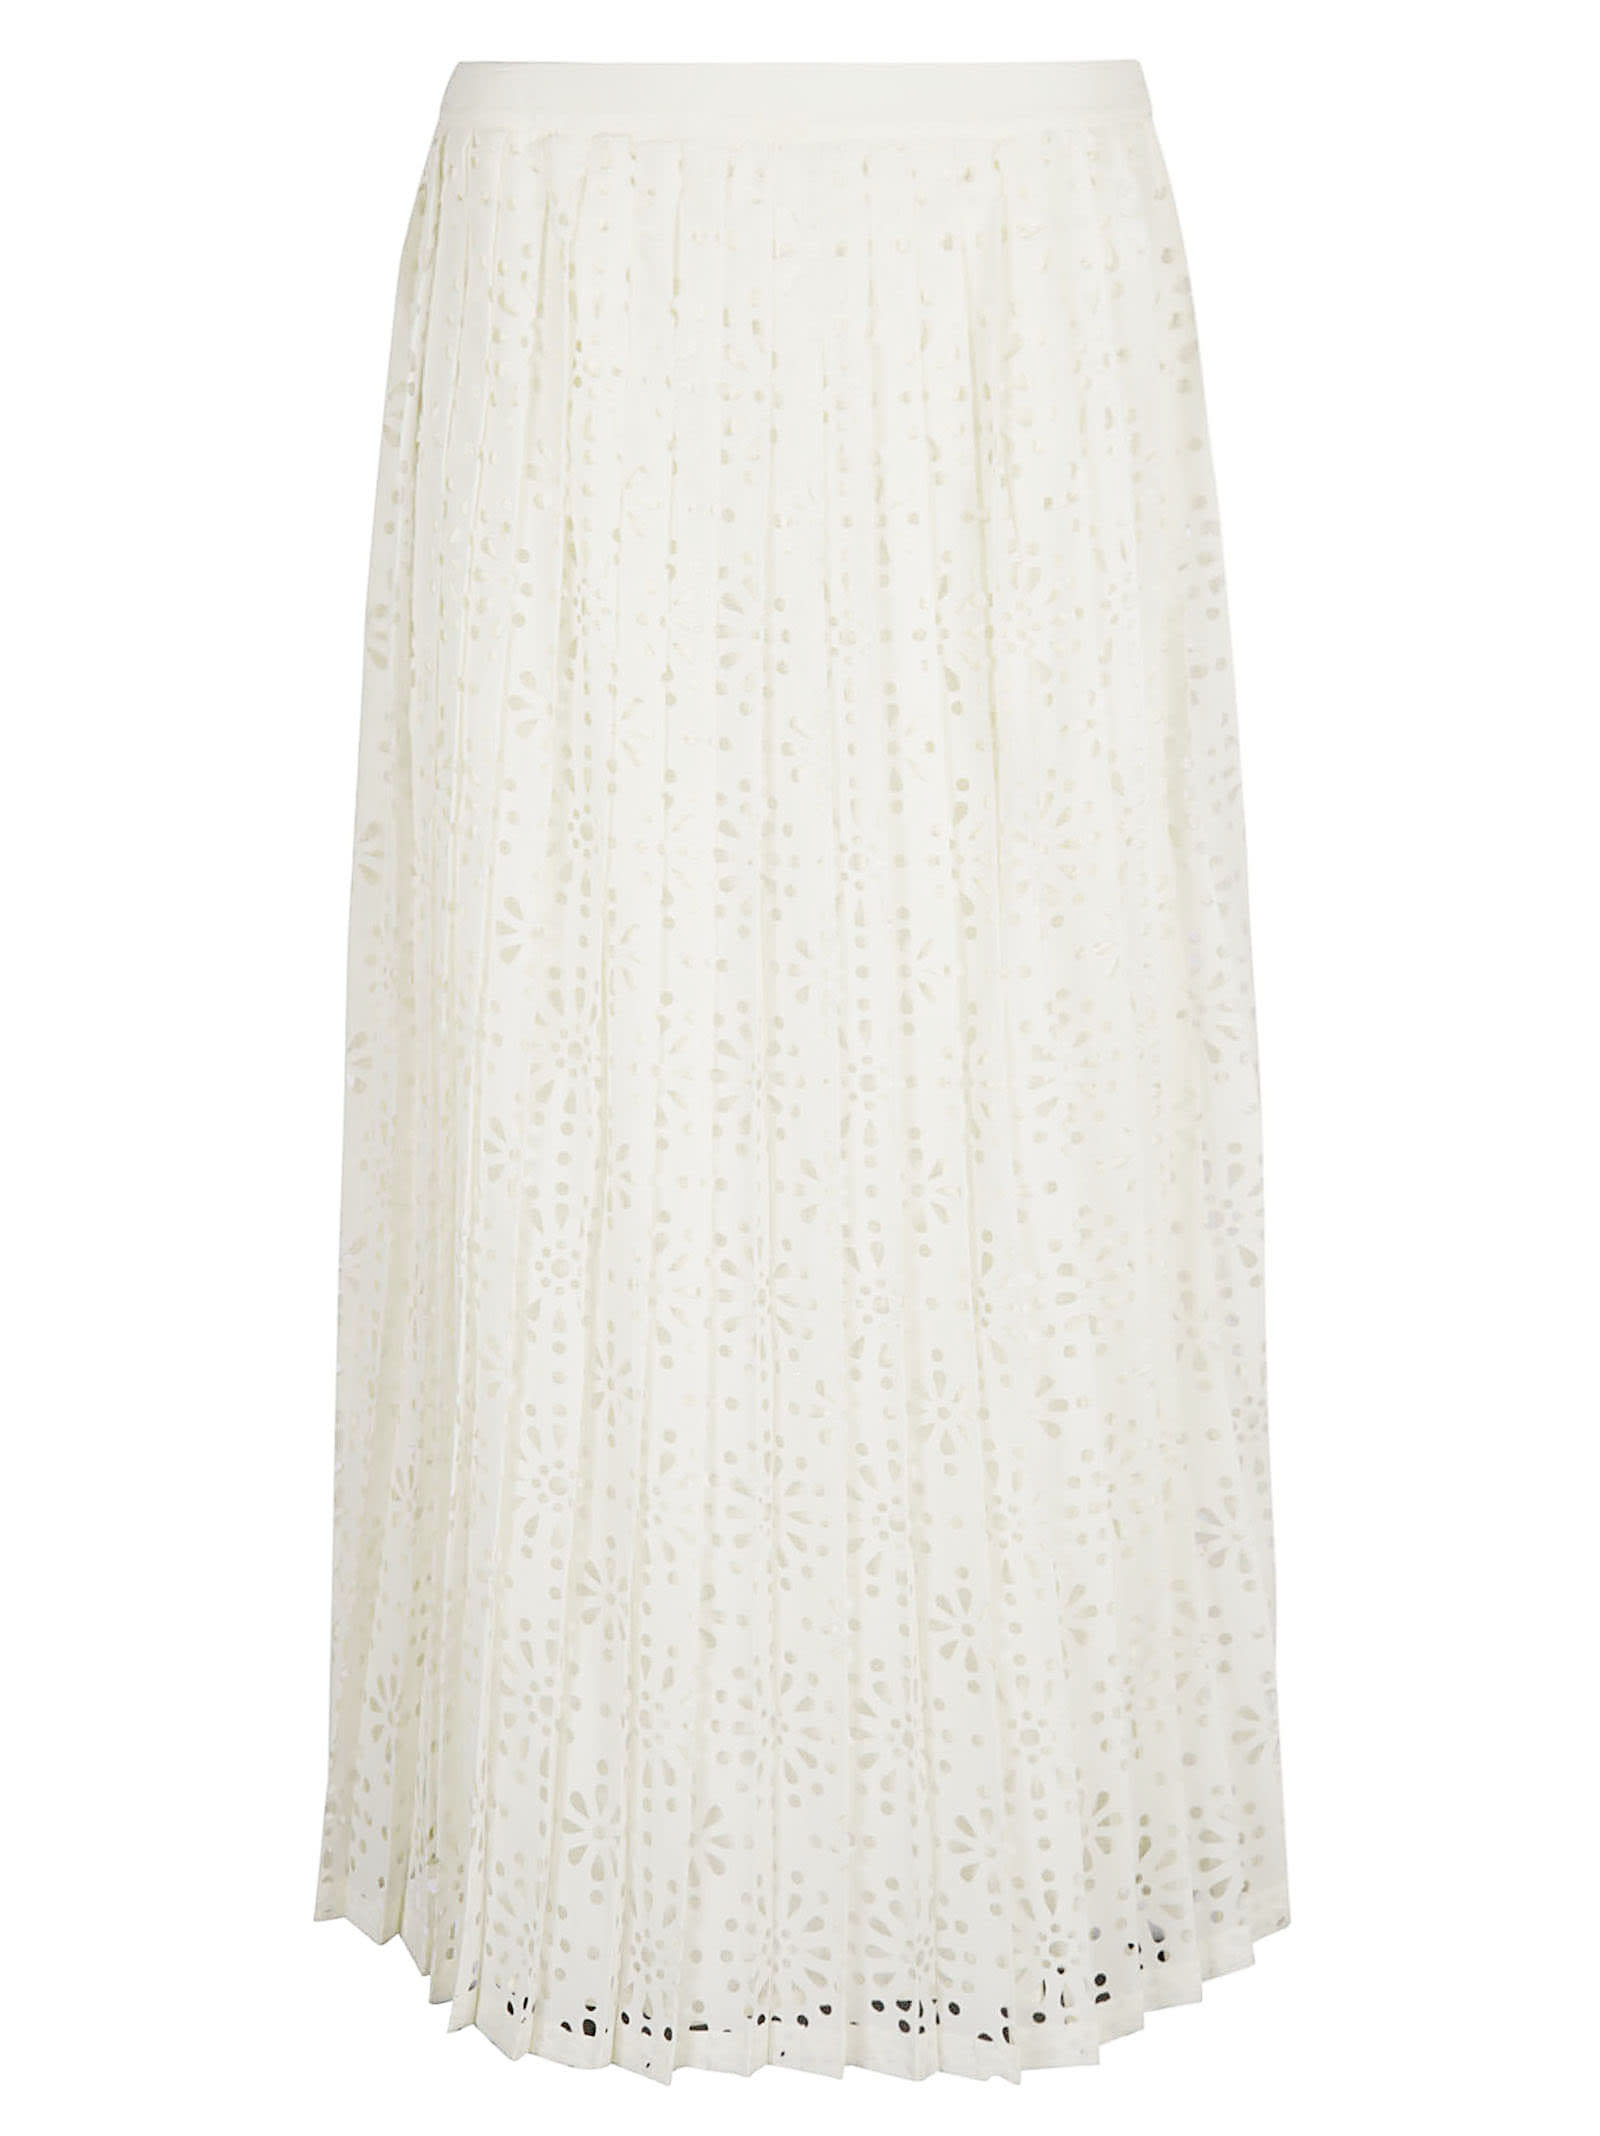 See by Chloé Cutout Floral Detail Long Skirt